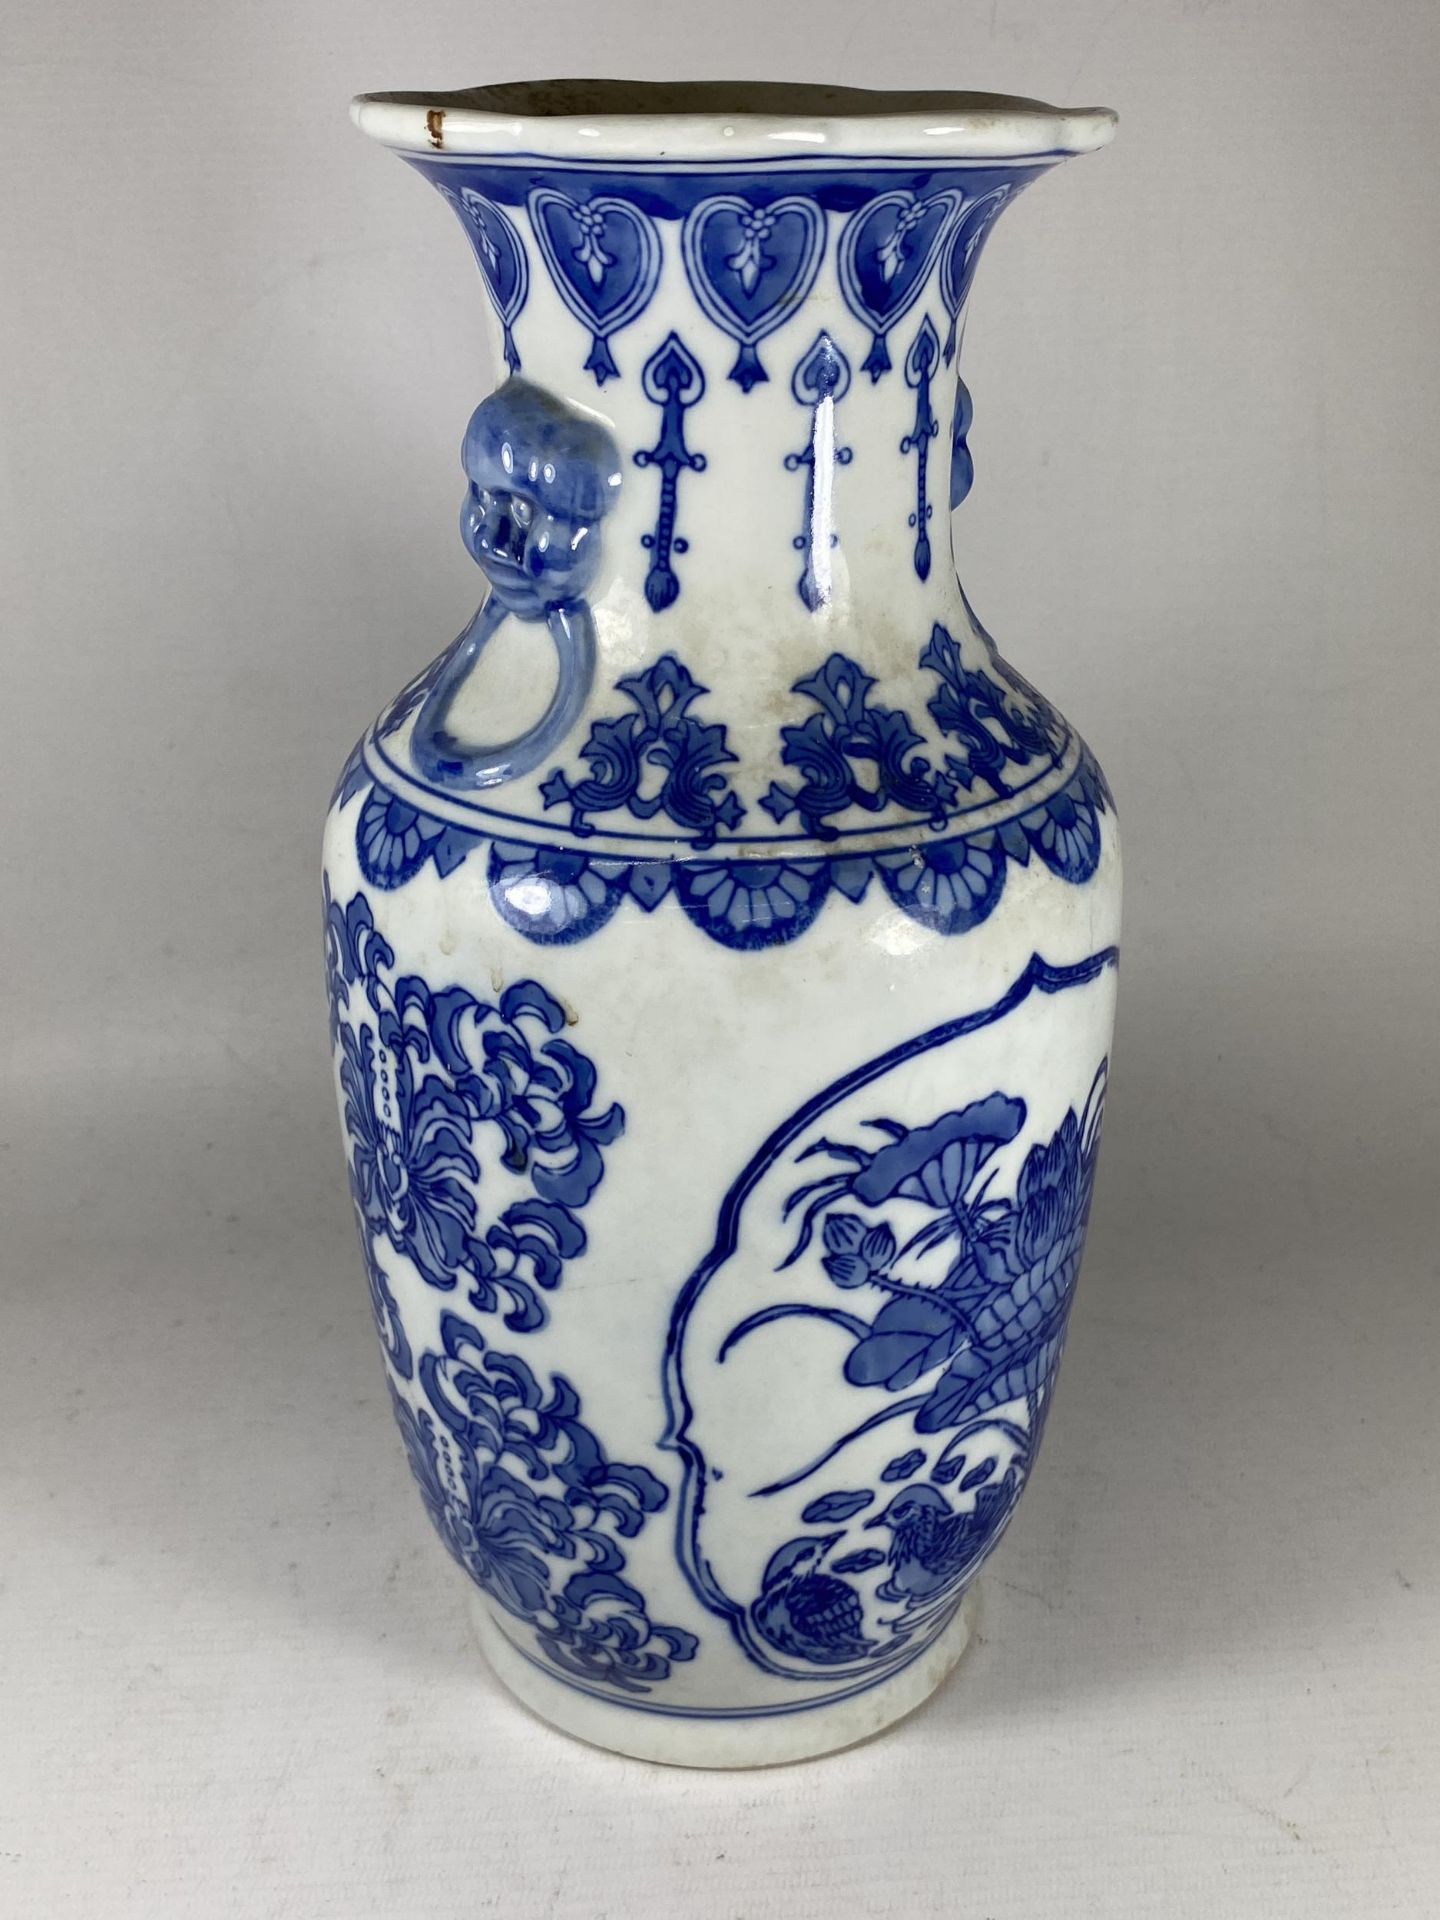 A 20TH CENTURY CHINESE BLUE AND WHITE FLORAL PATTERN VASE, HEIGHT 31CM - Image 2 of 4